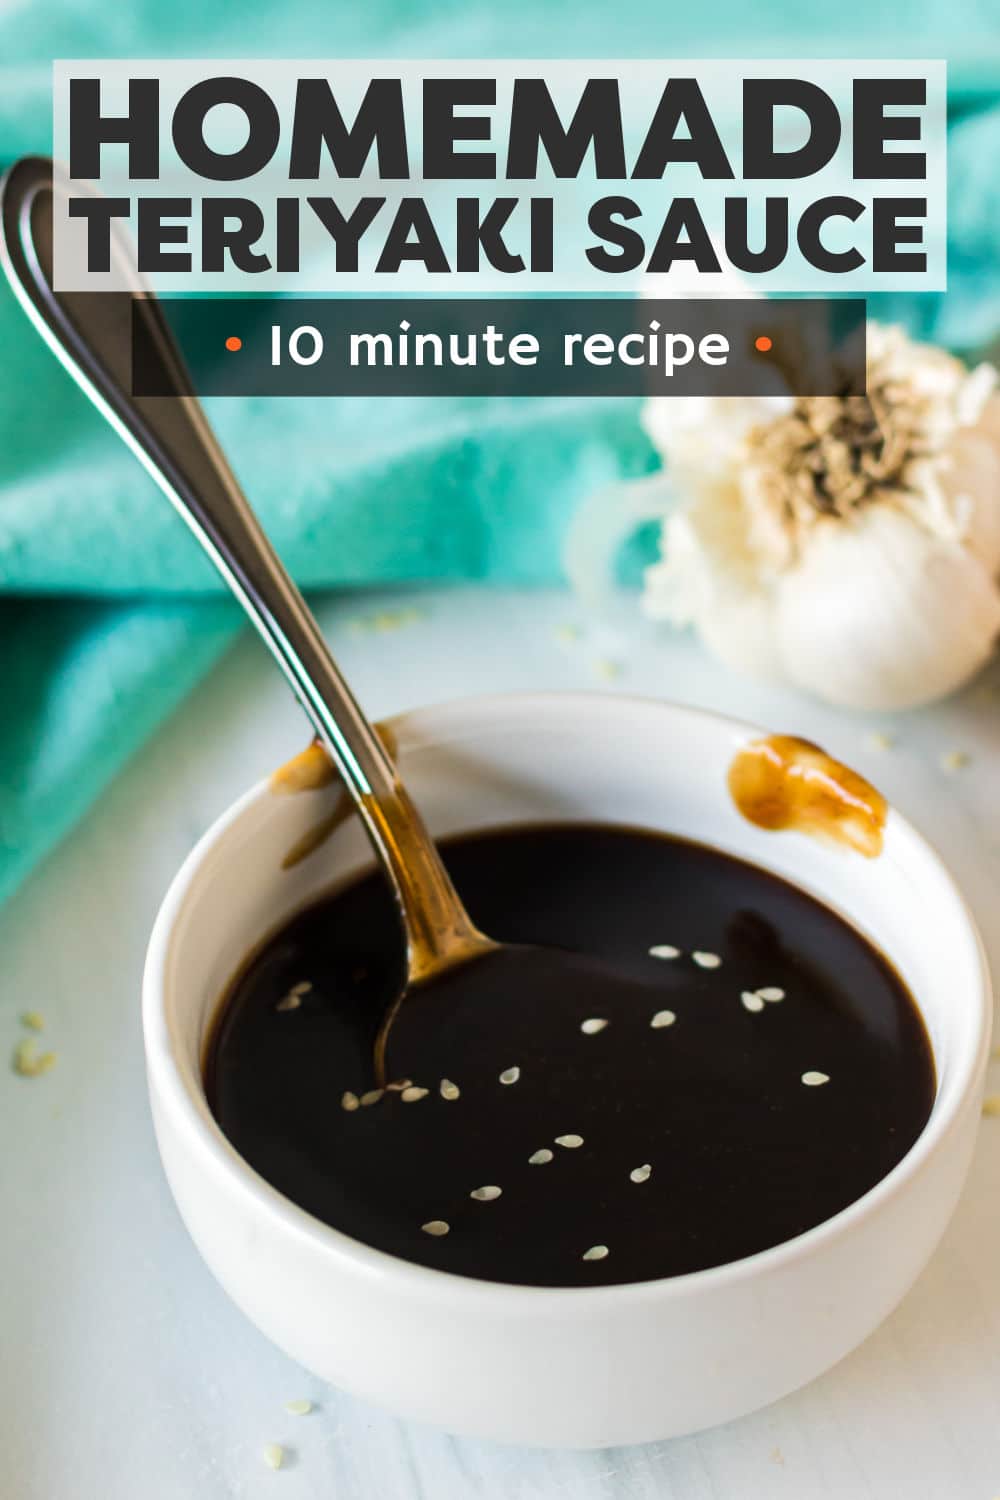 Homemade teriyaki sauce is so versatile and comes together in 10 minutes using just a handful of simple ingredients. This popular sweet and savory sauce is a recipe you'll use over and over again as a dip, a glaze, a marinade, and in all your tasty stir-fries! | www.persnicketyplates.com